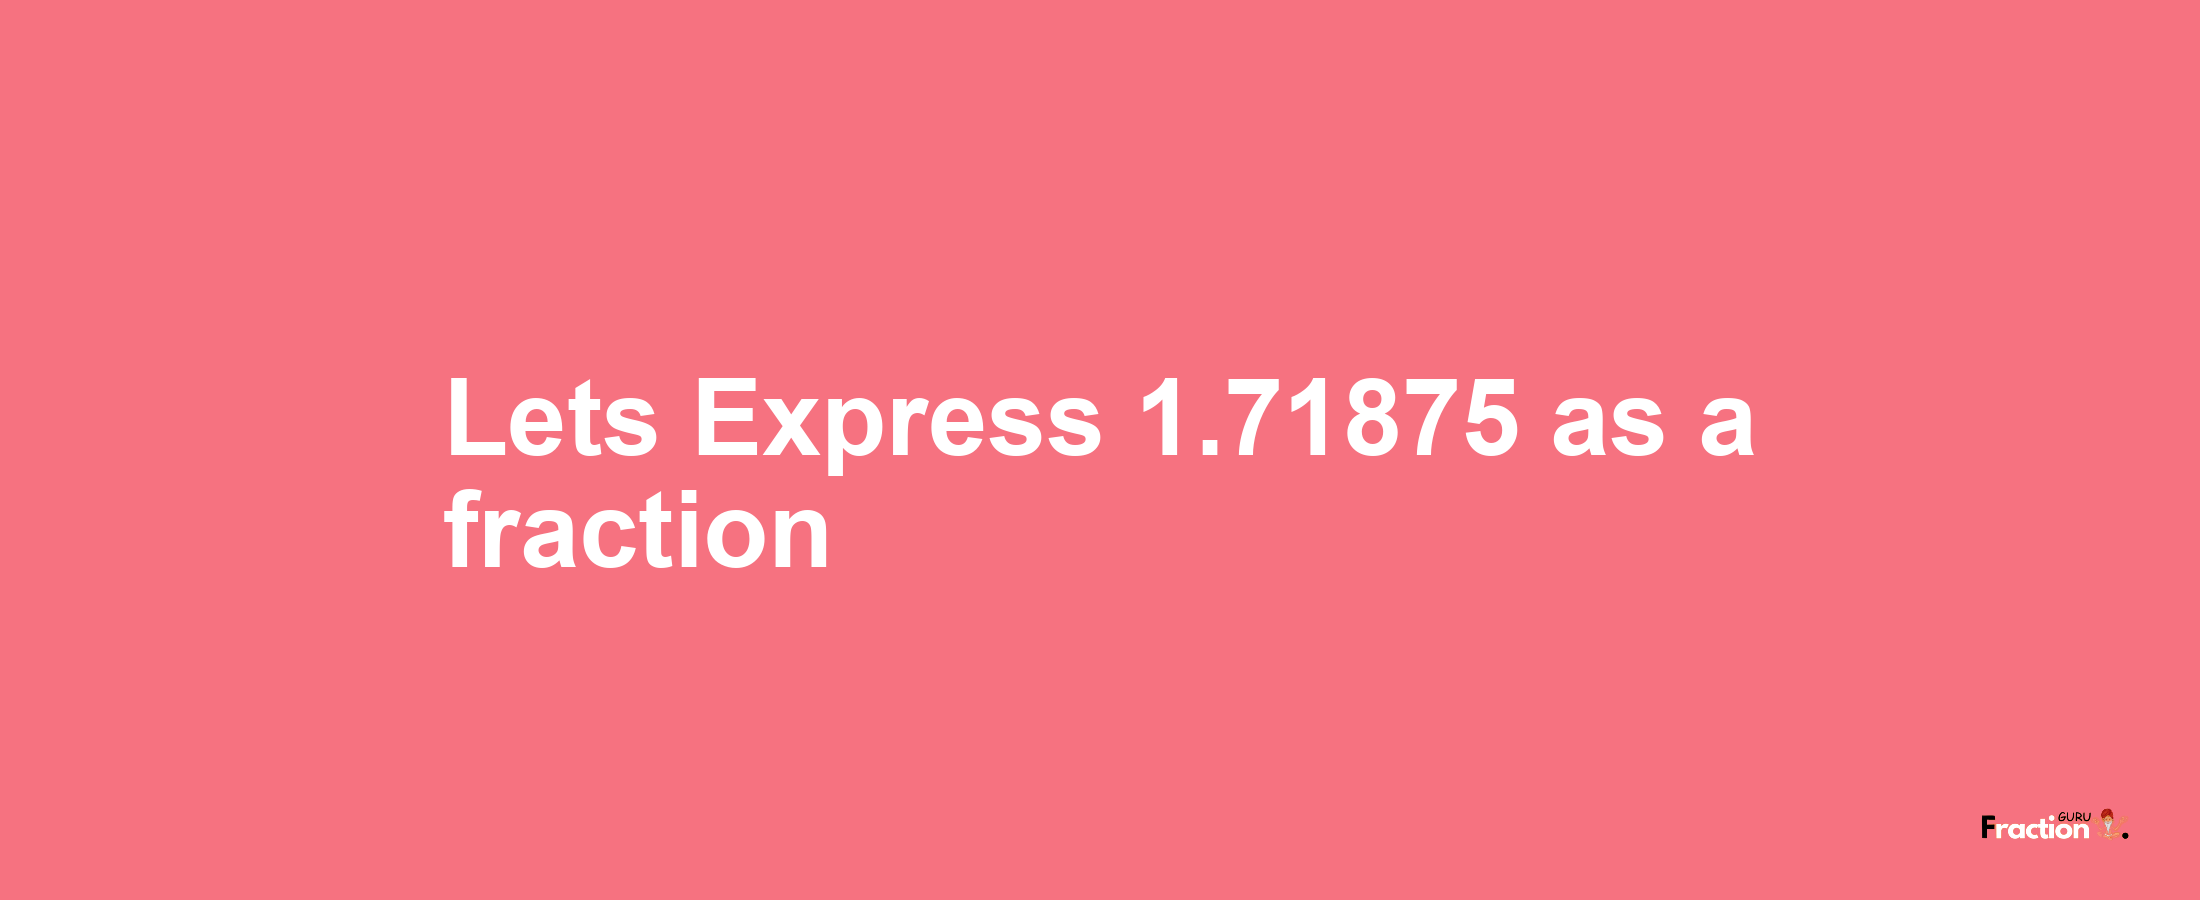 Lets Express 1.71875 as afraction